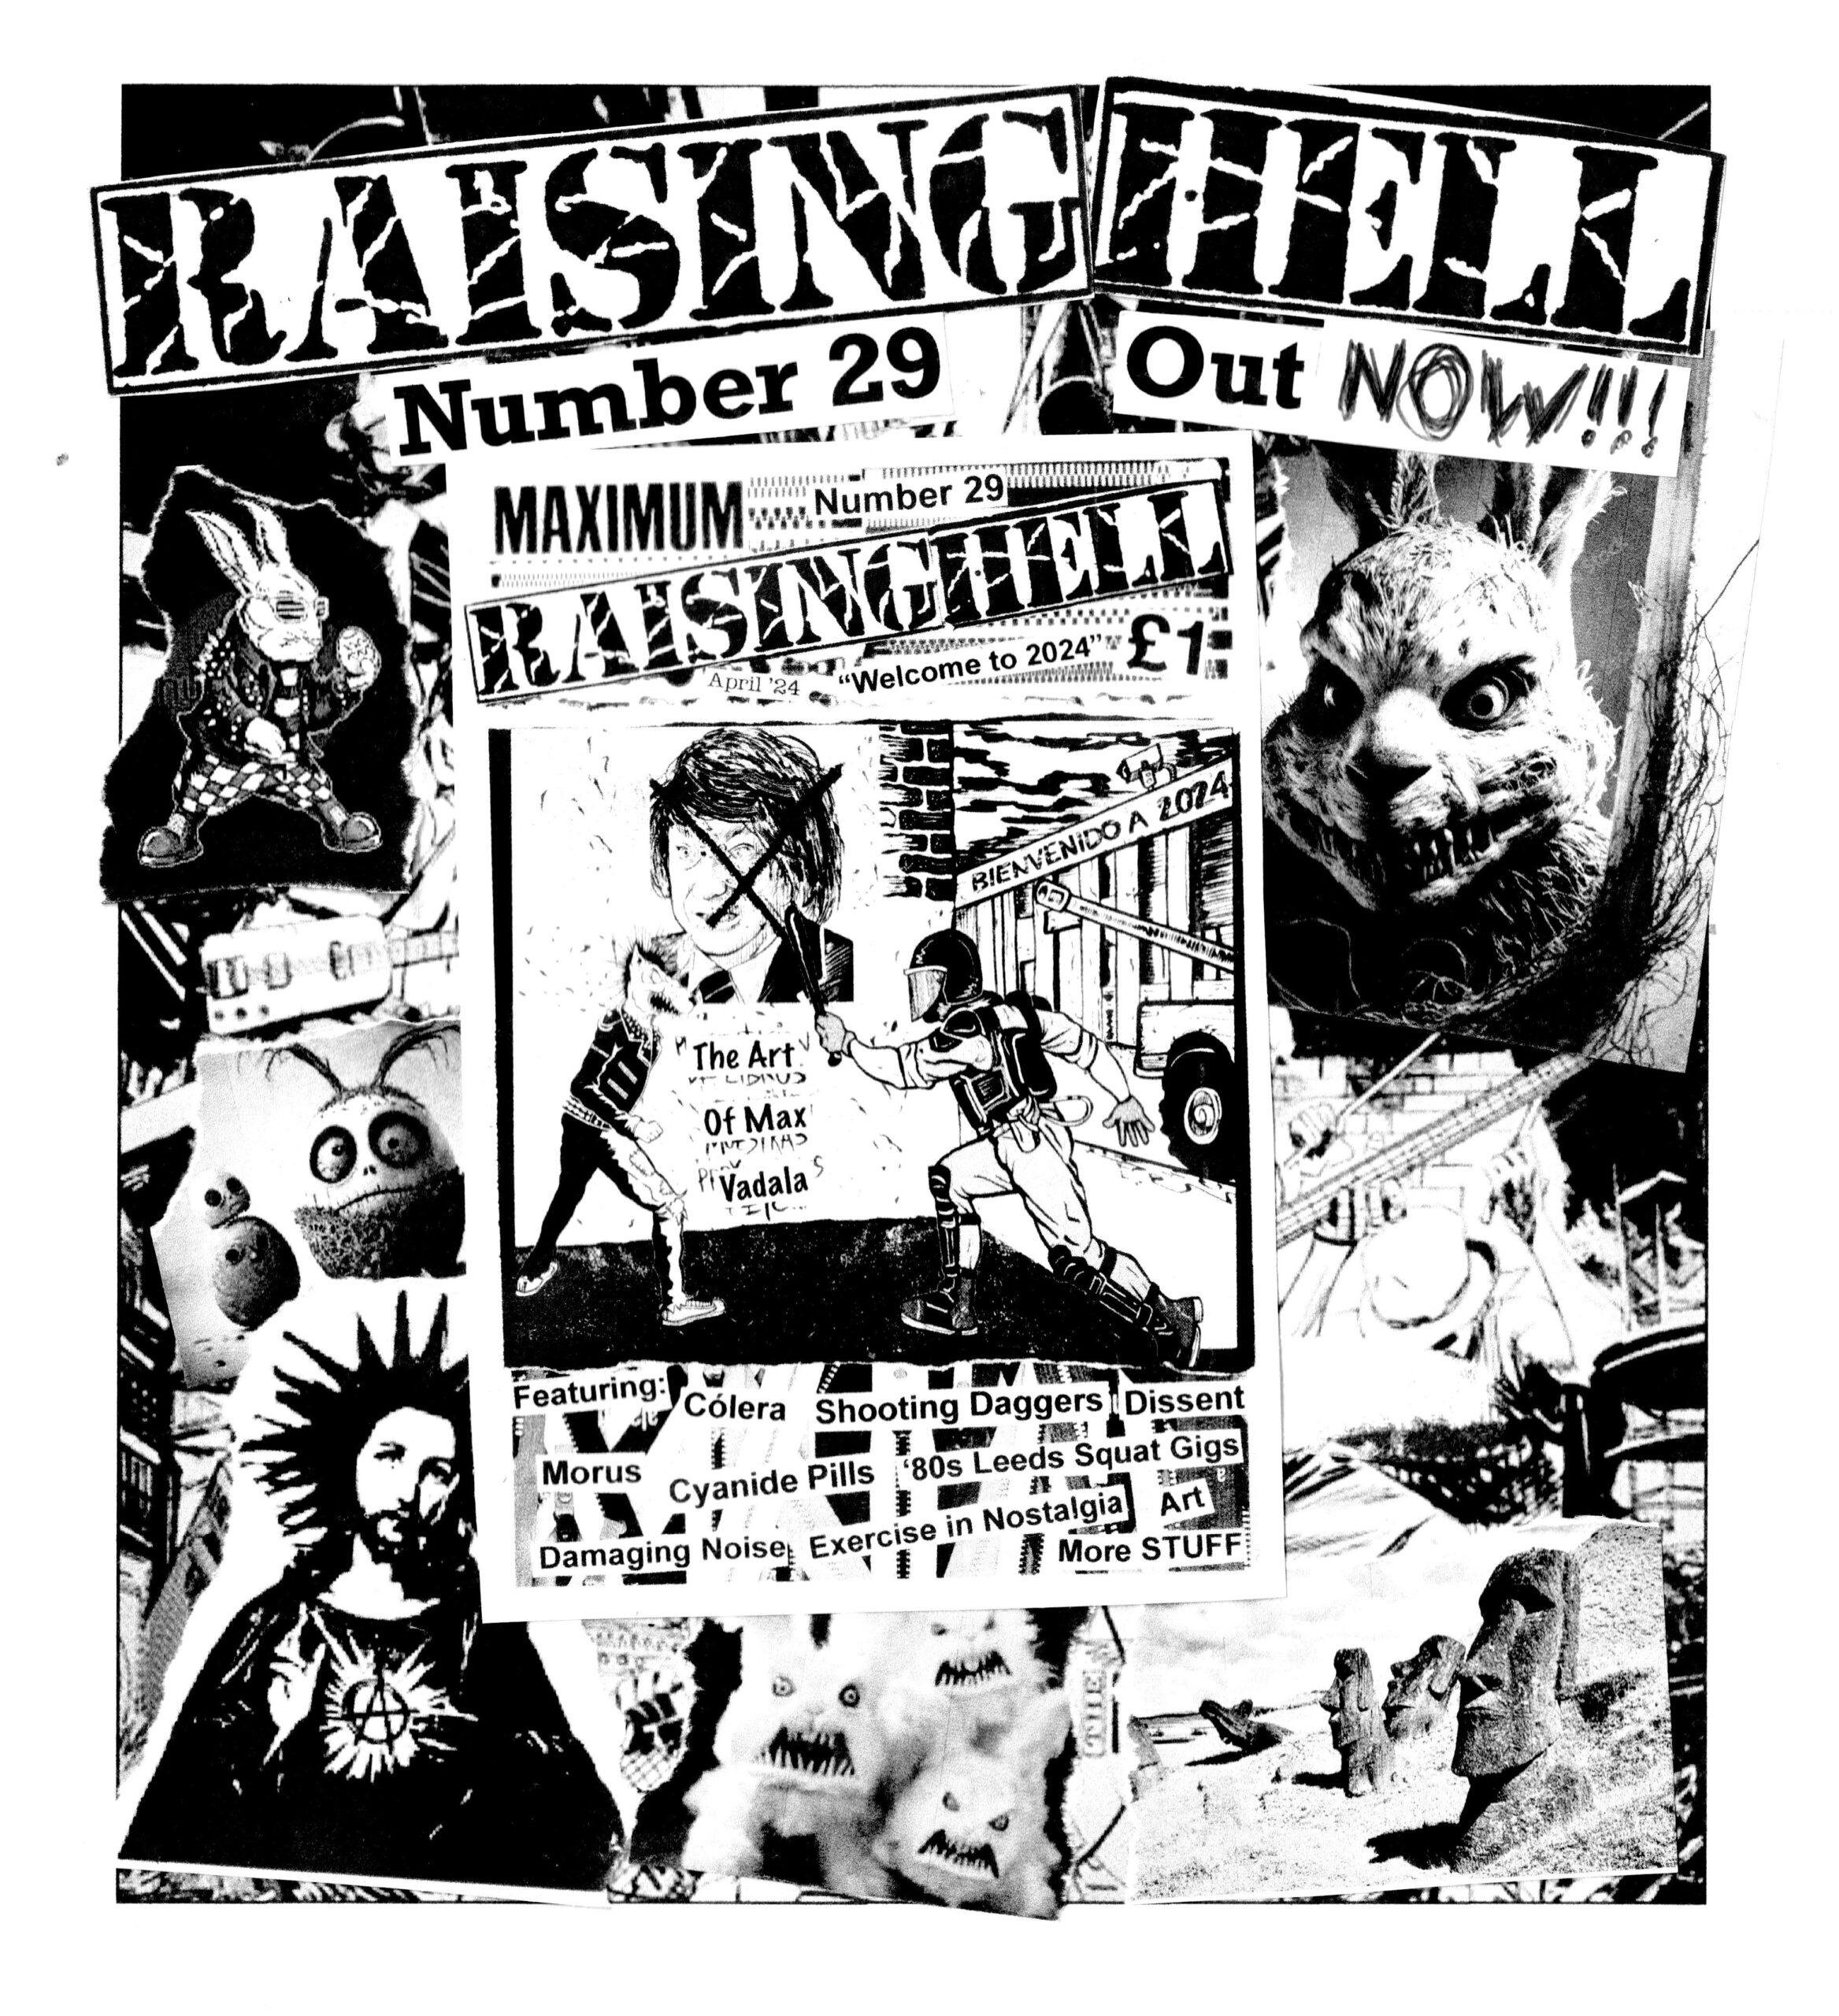 Raising Hell #29 out now!